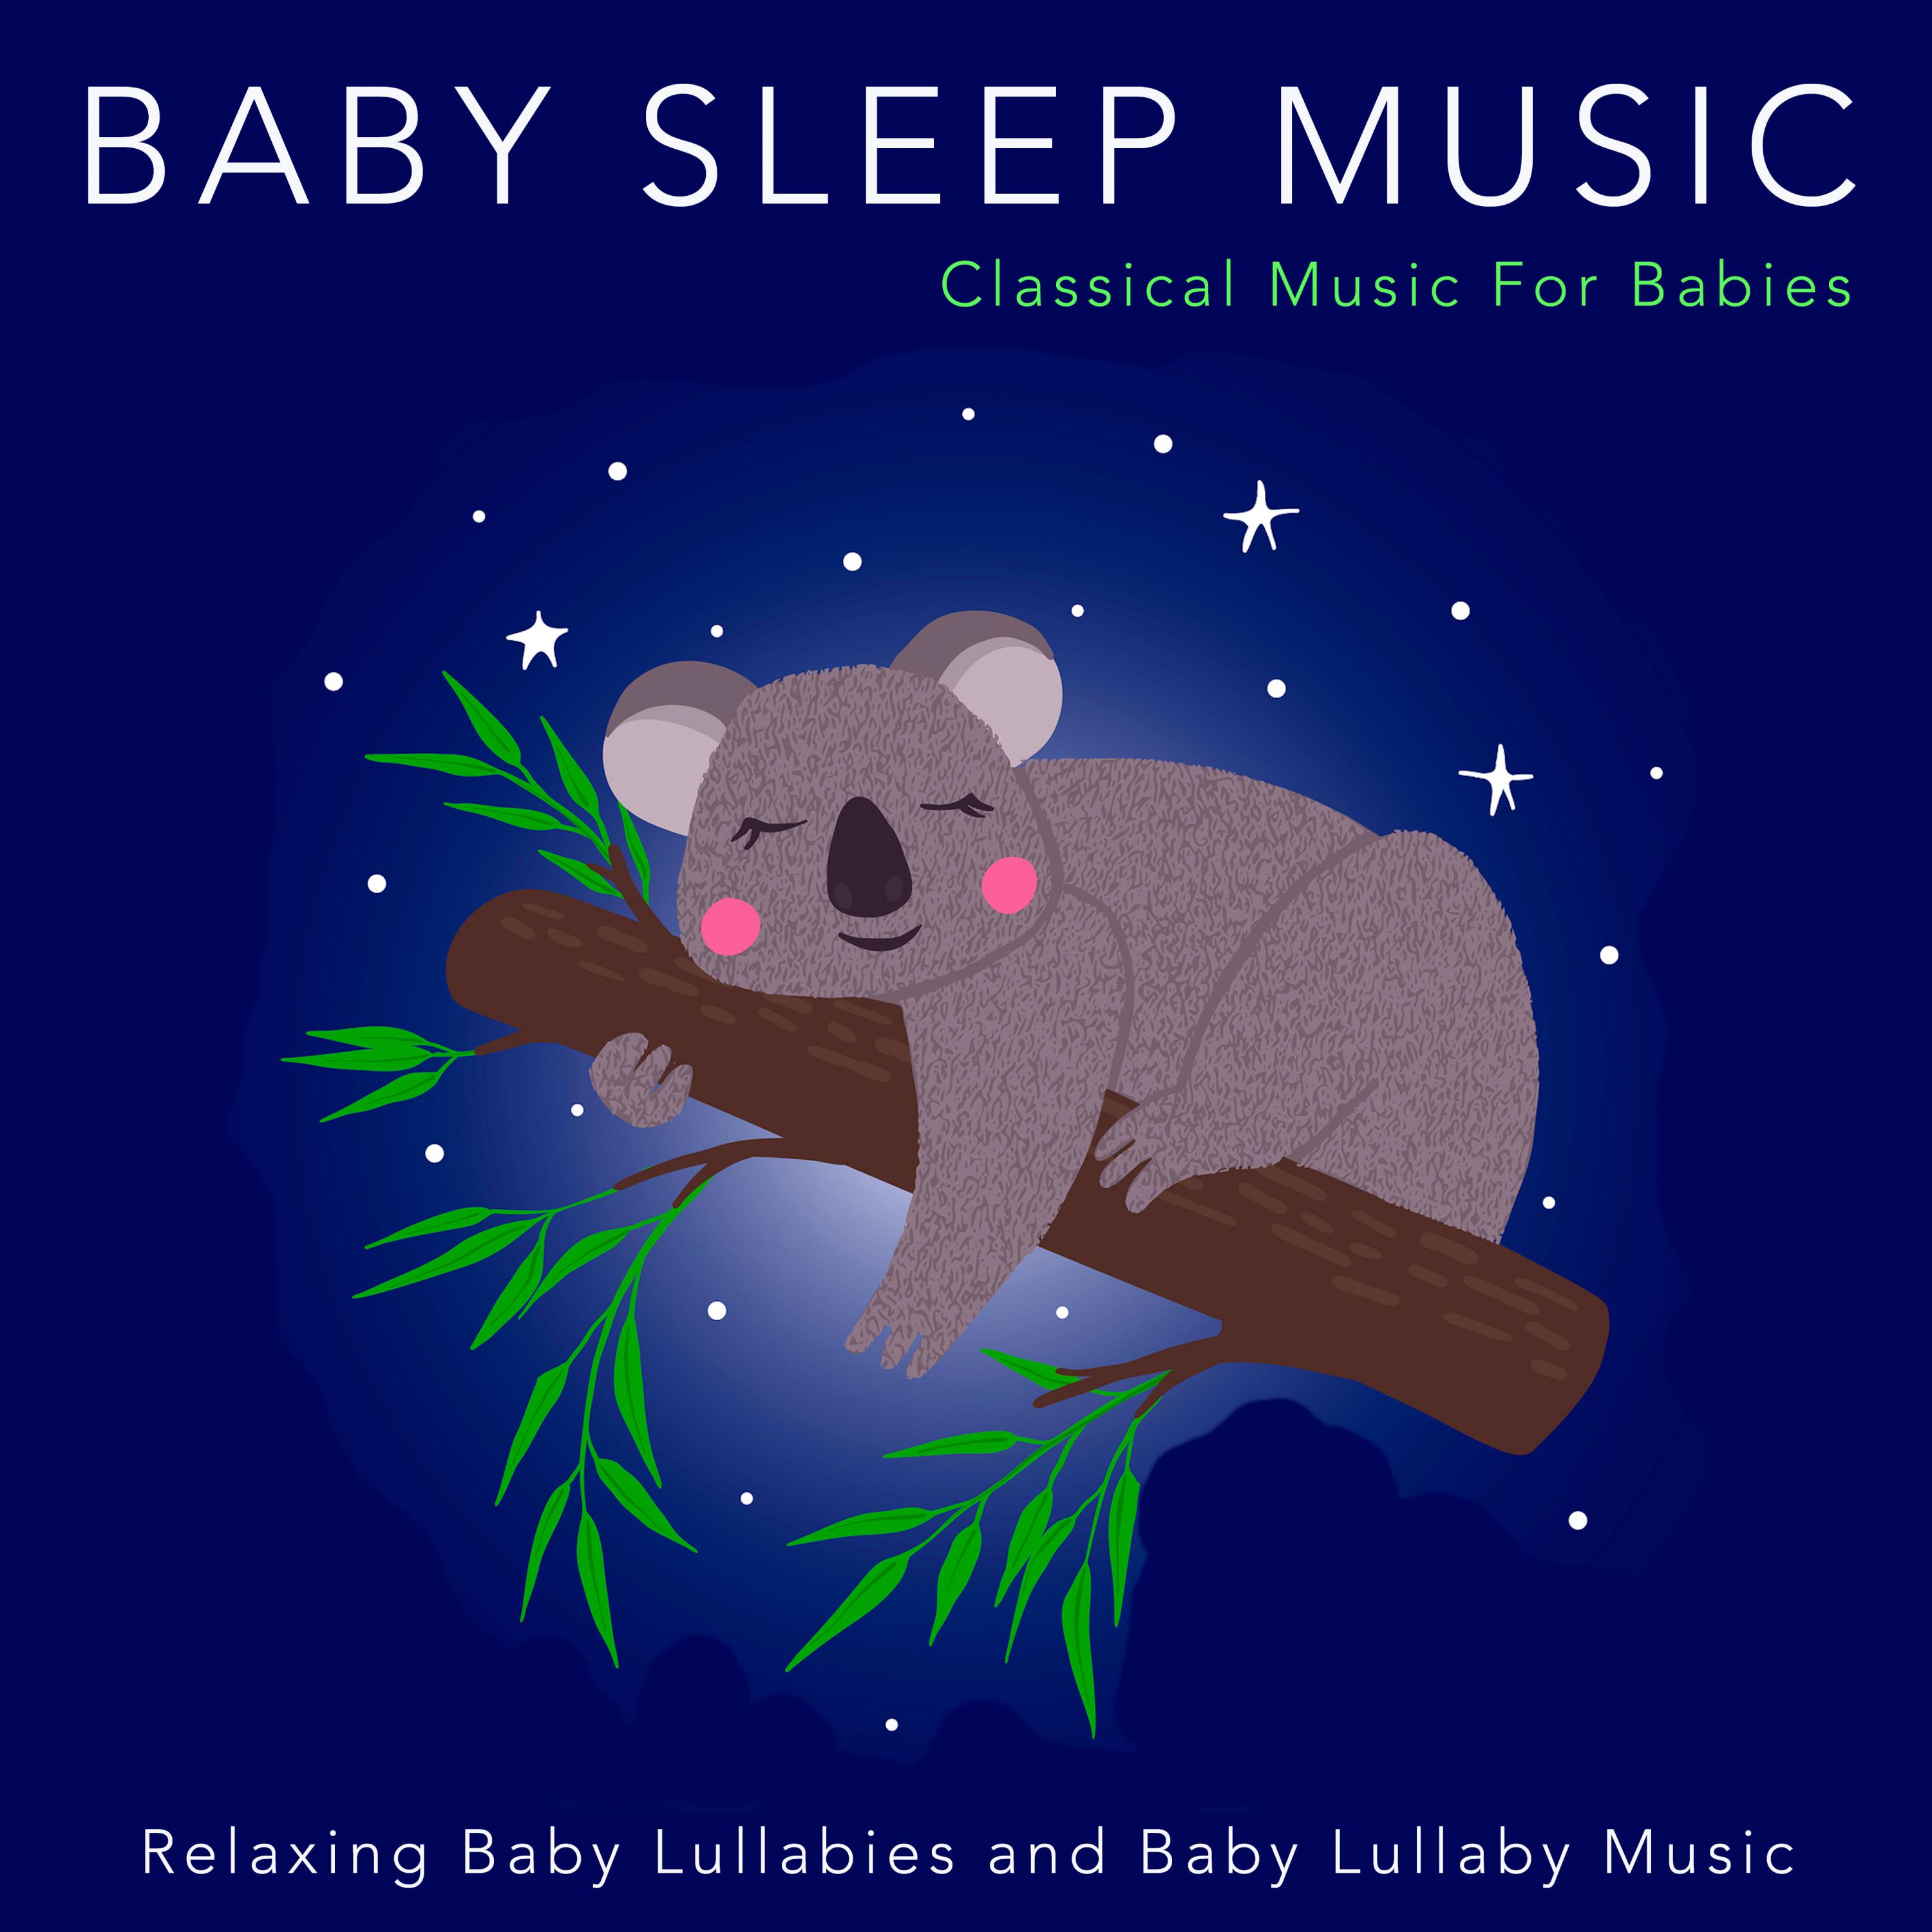 Prelude and Nocturne - Scriabin - Classical Music For Baby Sleep - Baby Lullaby - Baby Lullabies - Rain Sounds Sleep Aid